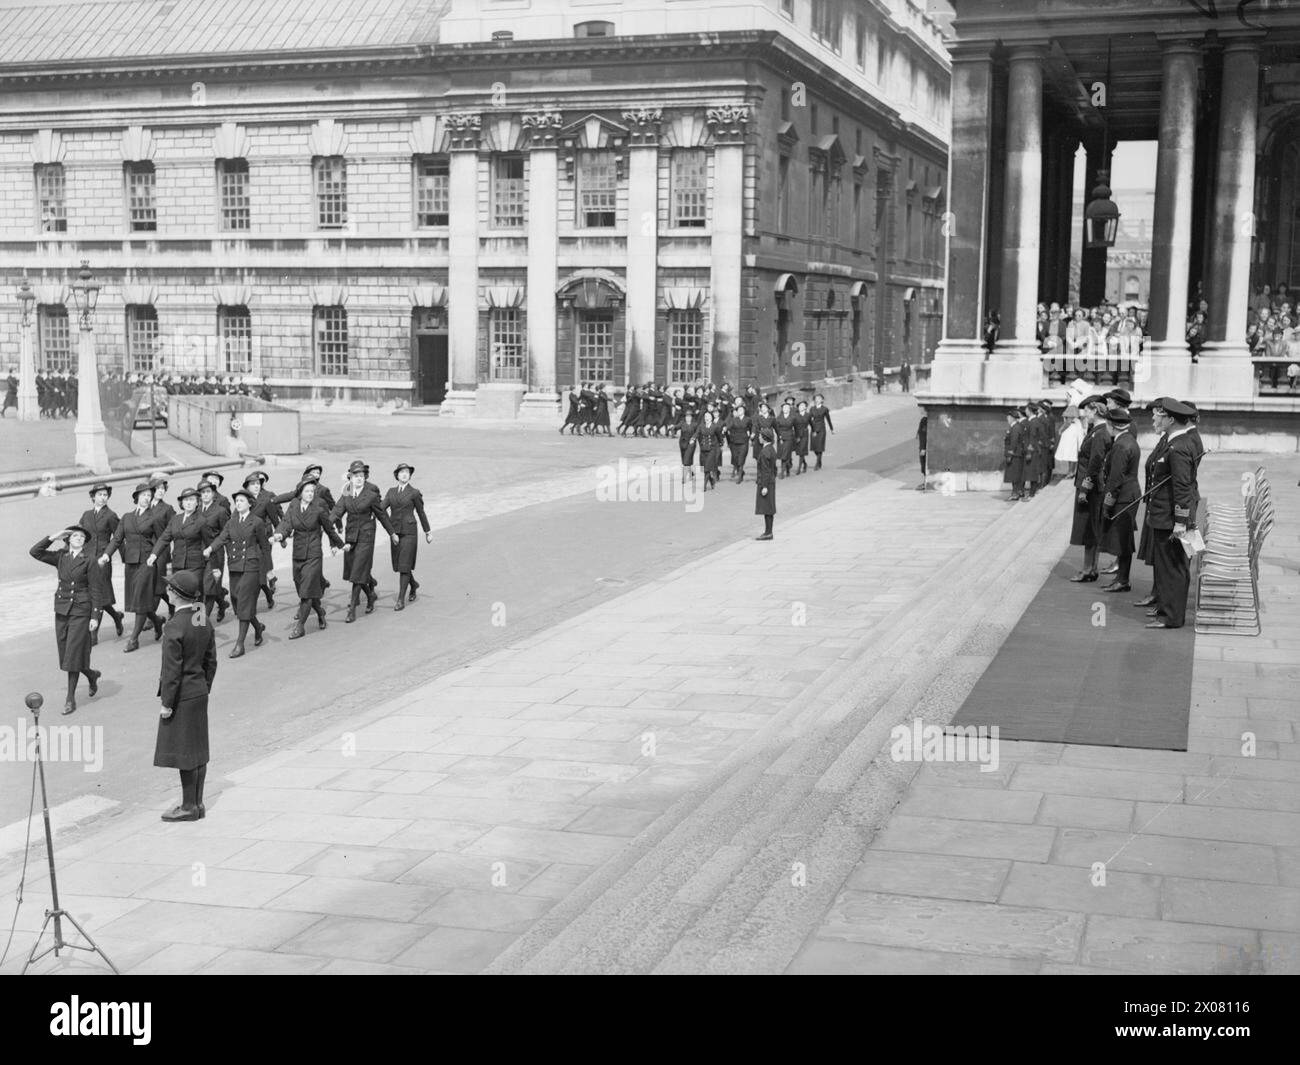 HRH THE DUCHESS OF KENT VISITS GREENWICH TO INSPECT WRENS. 1941. - The March Past by WRNS Stock Photo